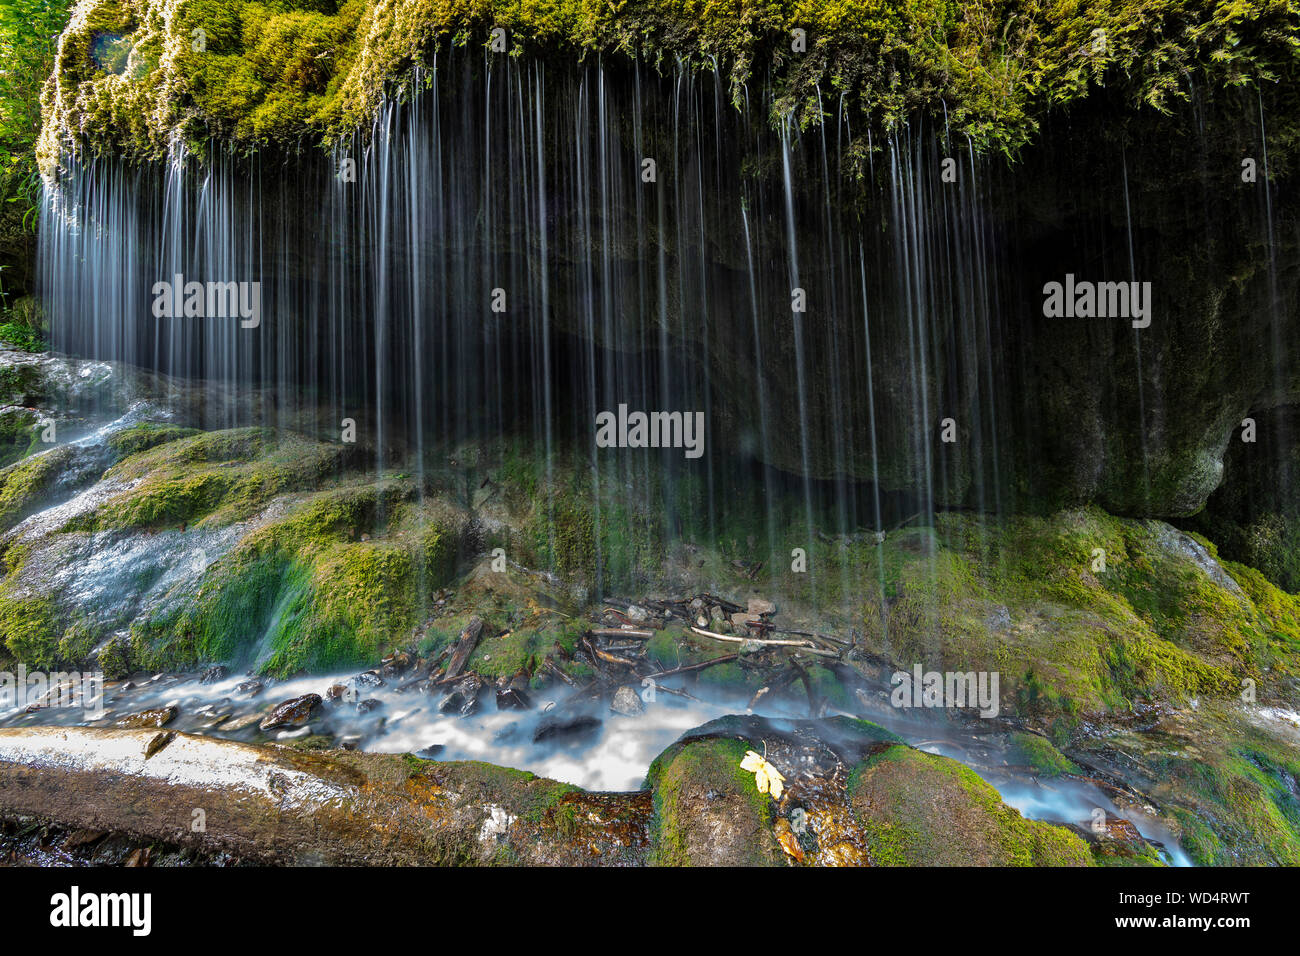 moss-covered waterfall Wutachschlucht gorge, Black Forest, Baden-Württemberg, Germany, Stock Photo